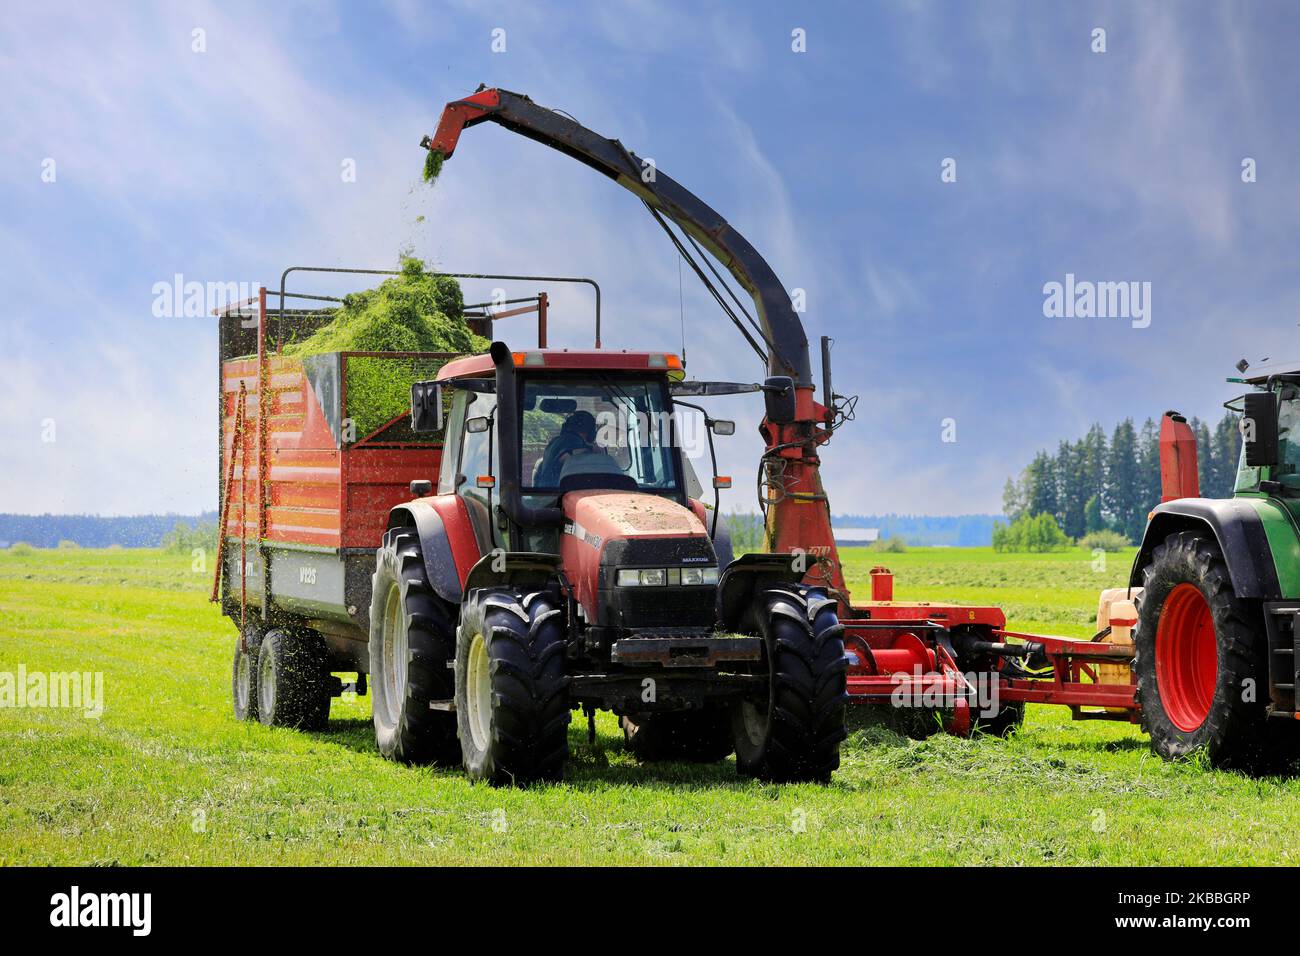 Two tractors in field harvesting grass with forage harvester for dairy cattle feed on a beautiful day in June. Stock Photo